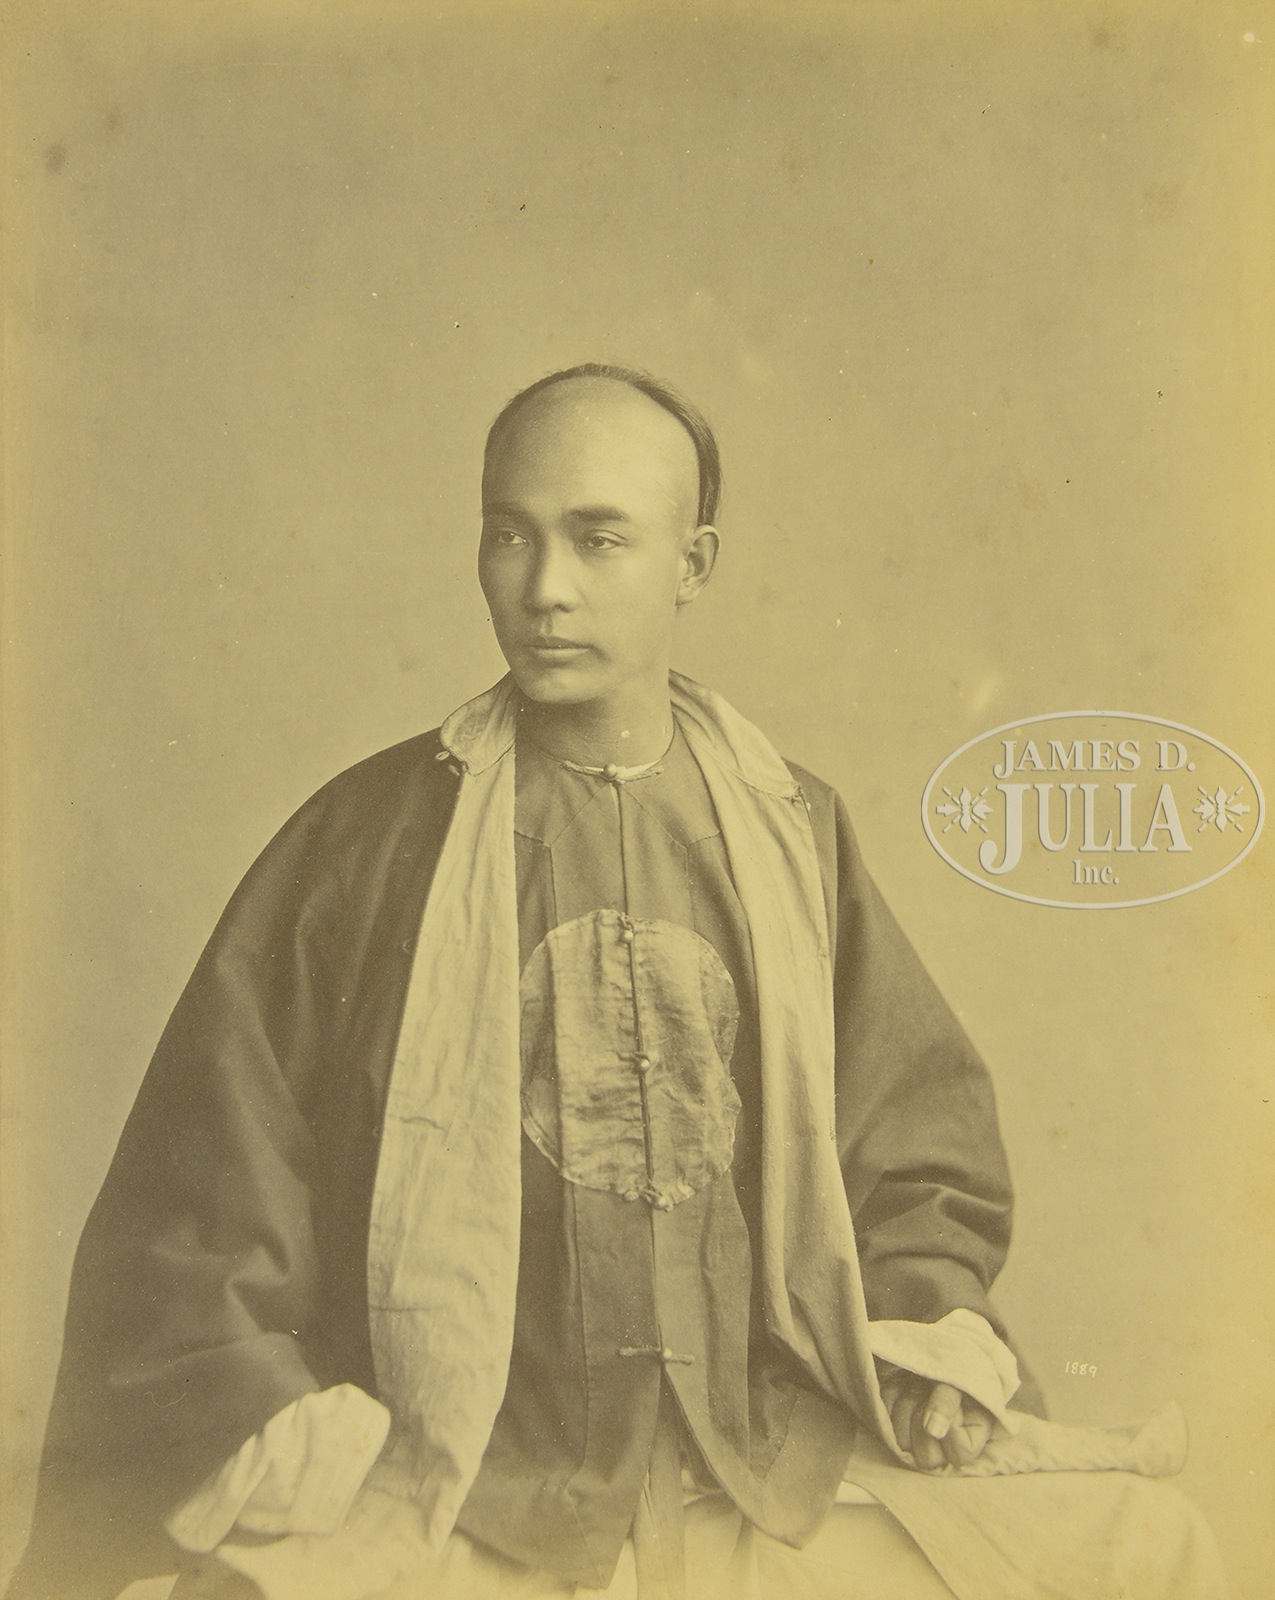 EXTRAORDINARY & MASSIVE LIFE LONG COLLECTION OF RARE ASIAN PHOTOGRAPHS AMASSED BY DR. HELGA WALL- - Image 86 of 222